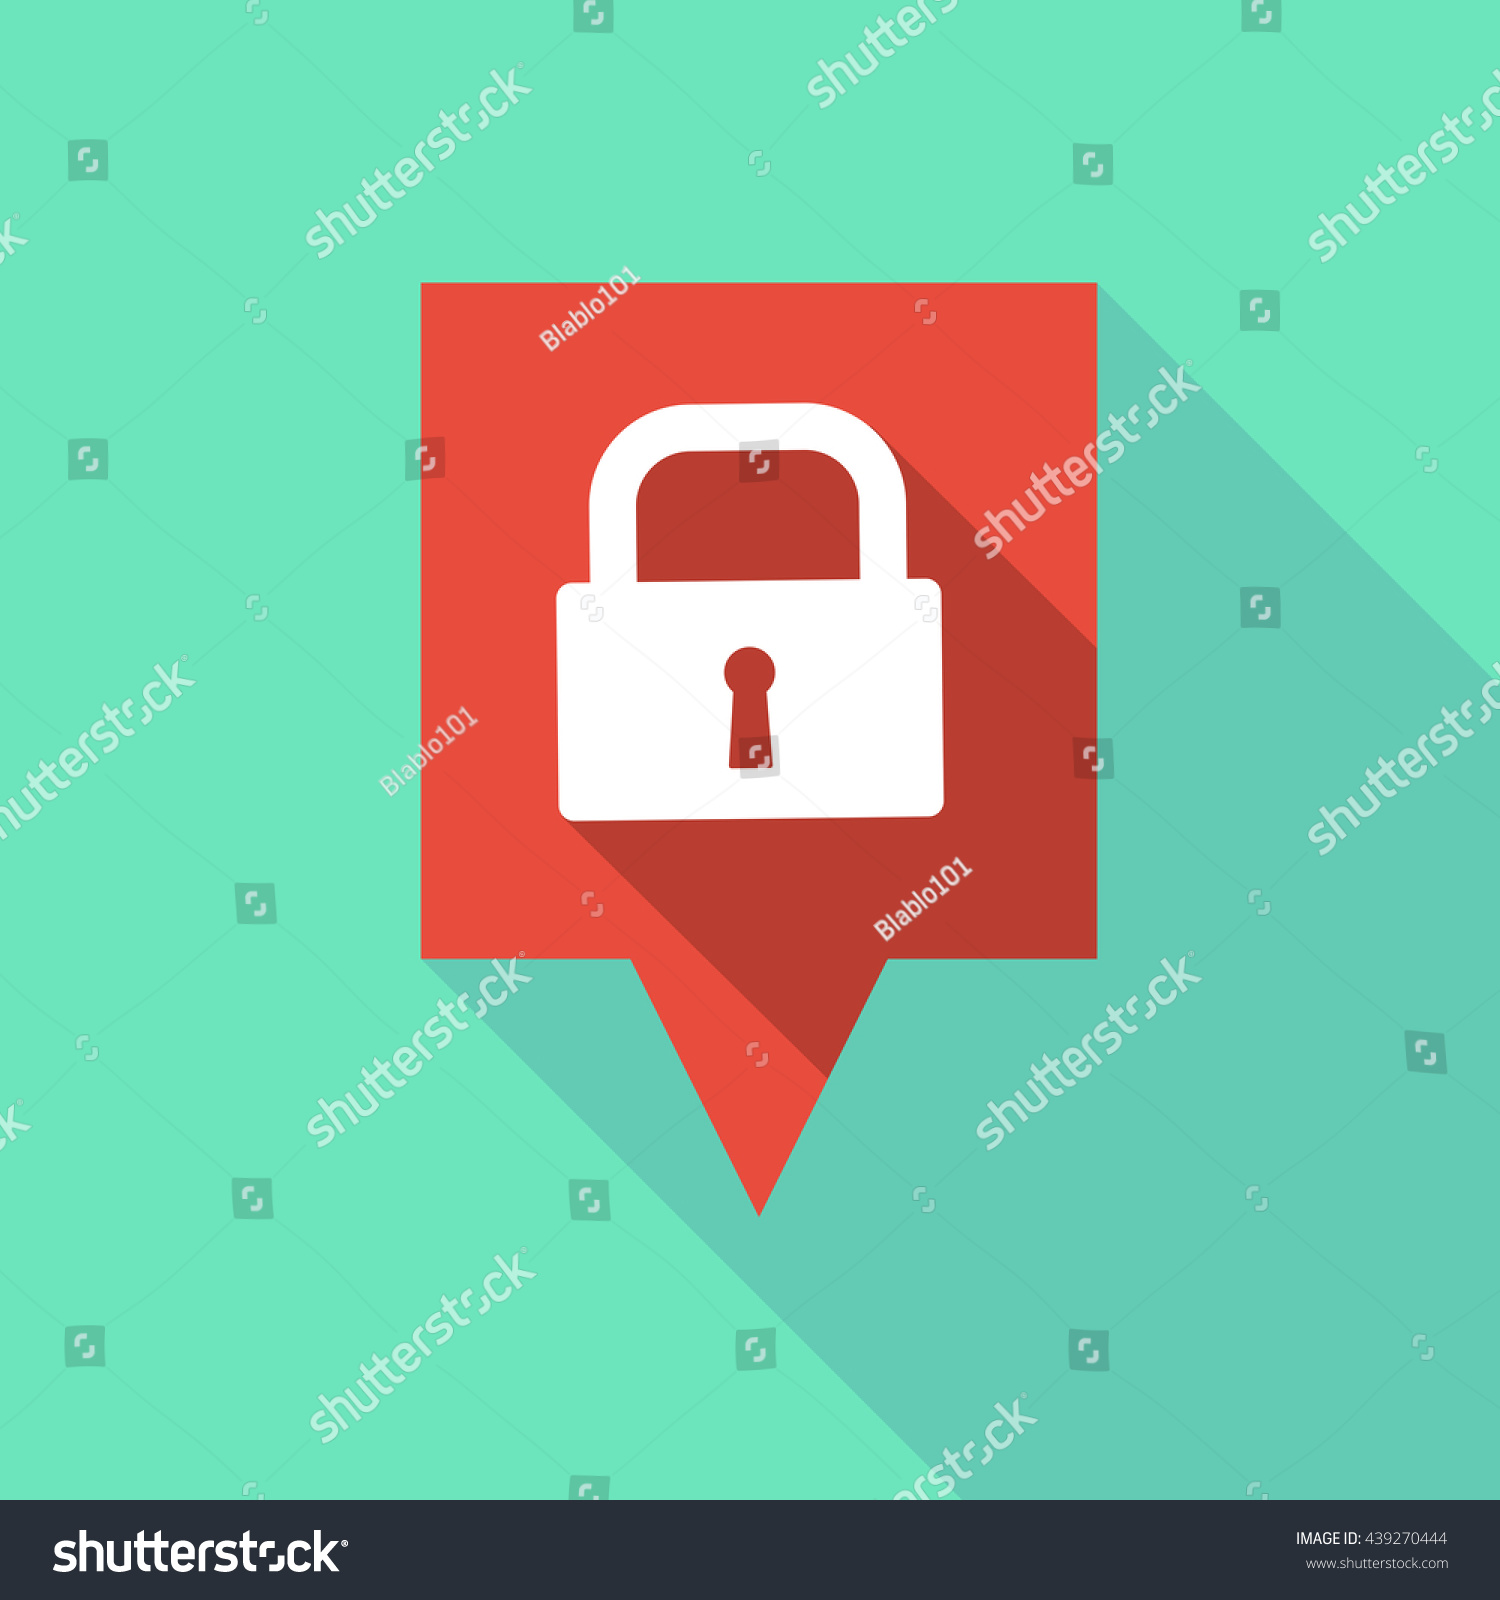 Illustration Long Tooltip Icon Closed Lock Stock Vector Royalty Free 439270444 Shutterstock 5834